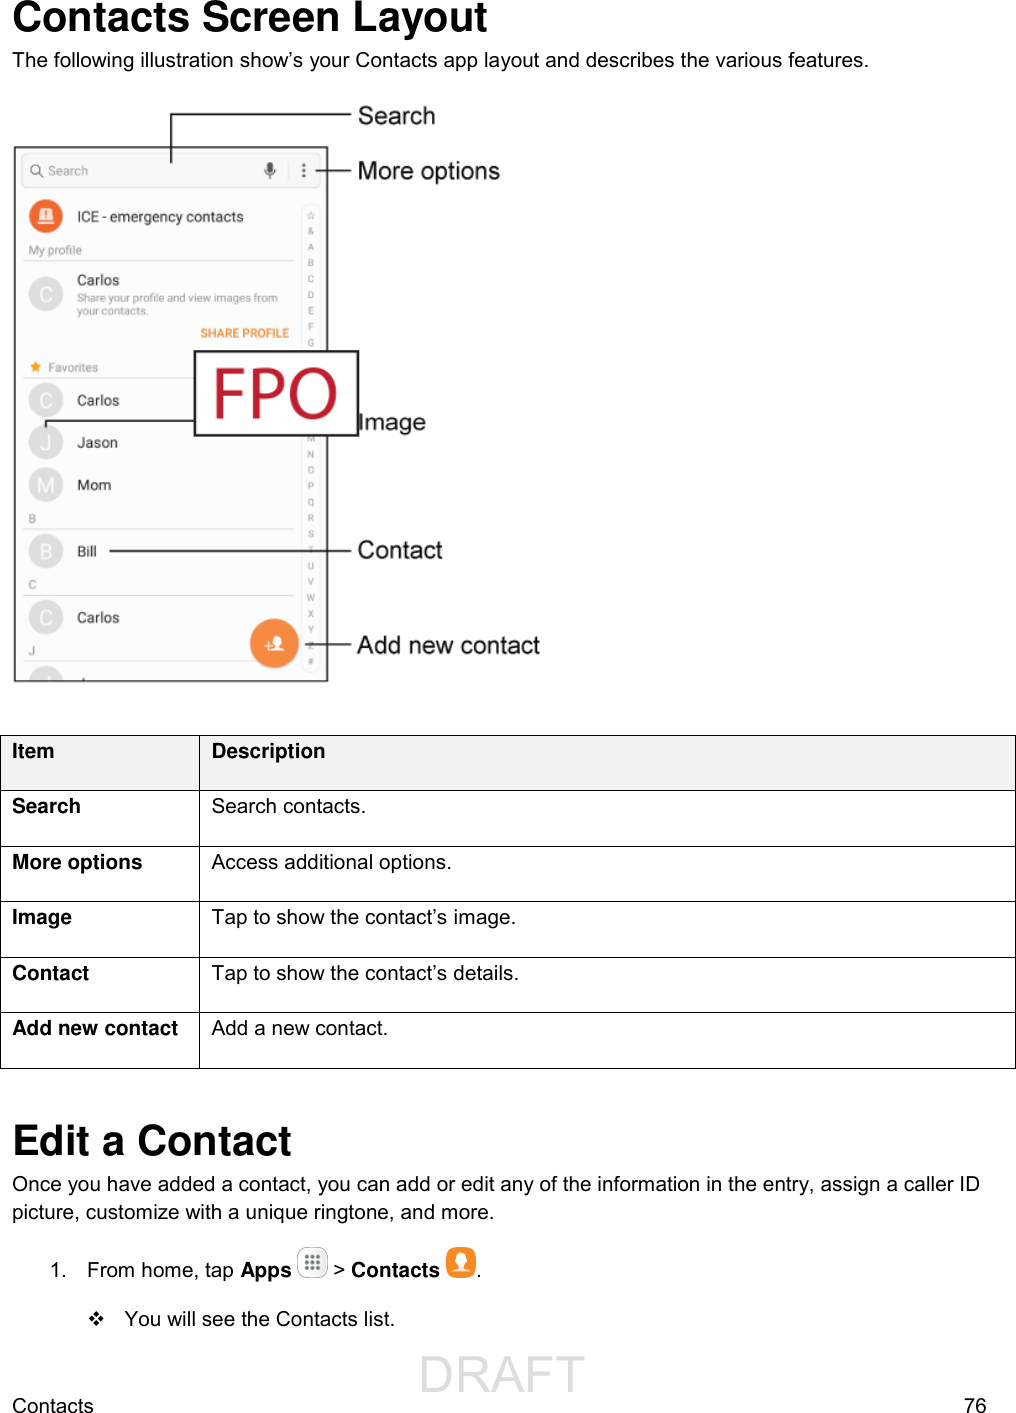                  DRAFT FOR INTERNAL USE ONLYContacts  76 Contacts Screen Layout The following illustration show’s your Contacts app layout and describes the various features.    Item Description Search Search contacts. More options Access additional options. Image Tap to show the contact’s image. Contact Tap to show the contact’s details. Add new contact Add a new contact.  Edit a Contact Once you have added a contact, you can add or edit any of the information in the entry, assign a caller ID picture, customize with a unique ringtone, and more. 1.  From home, tap Apps   &gt; Contacts .    You will see the Contacts list. 